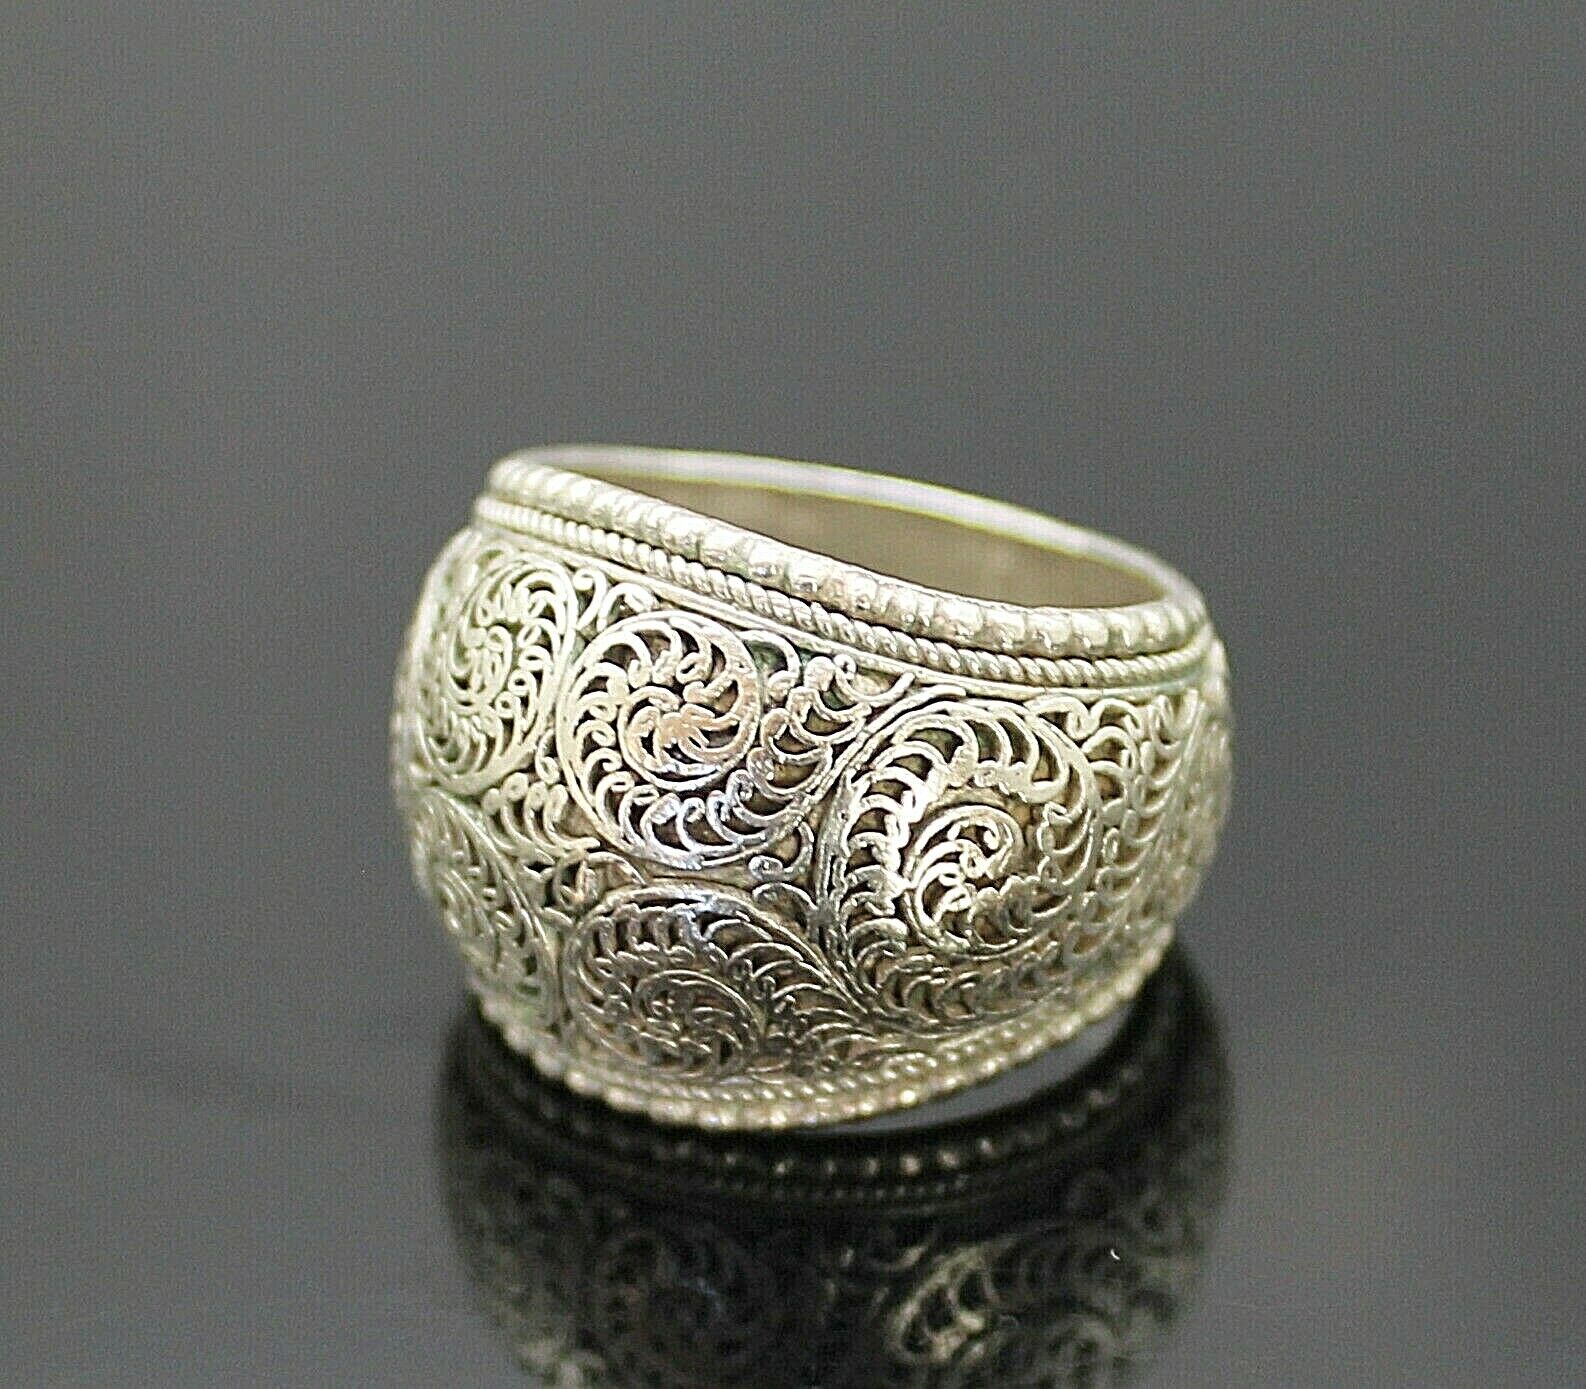 SUPERB VINTAGE GORGEOUS DETAILED SWIRLS STERLING SILVER DOMED RING SIZE 6.25